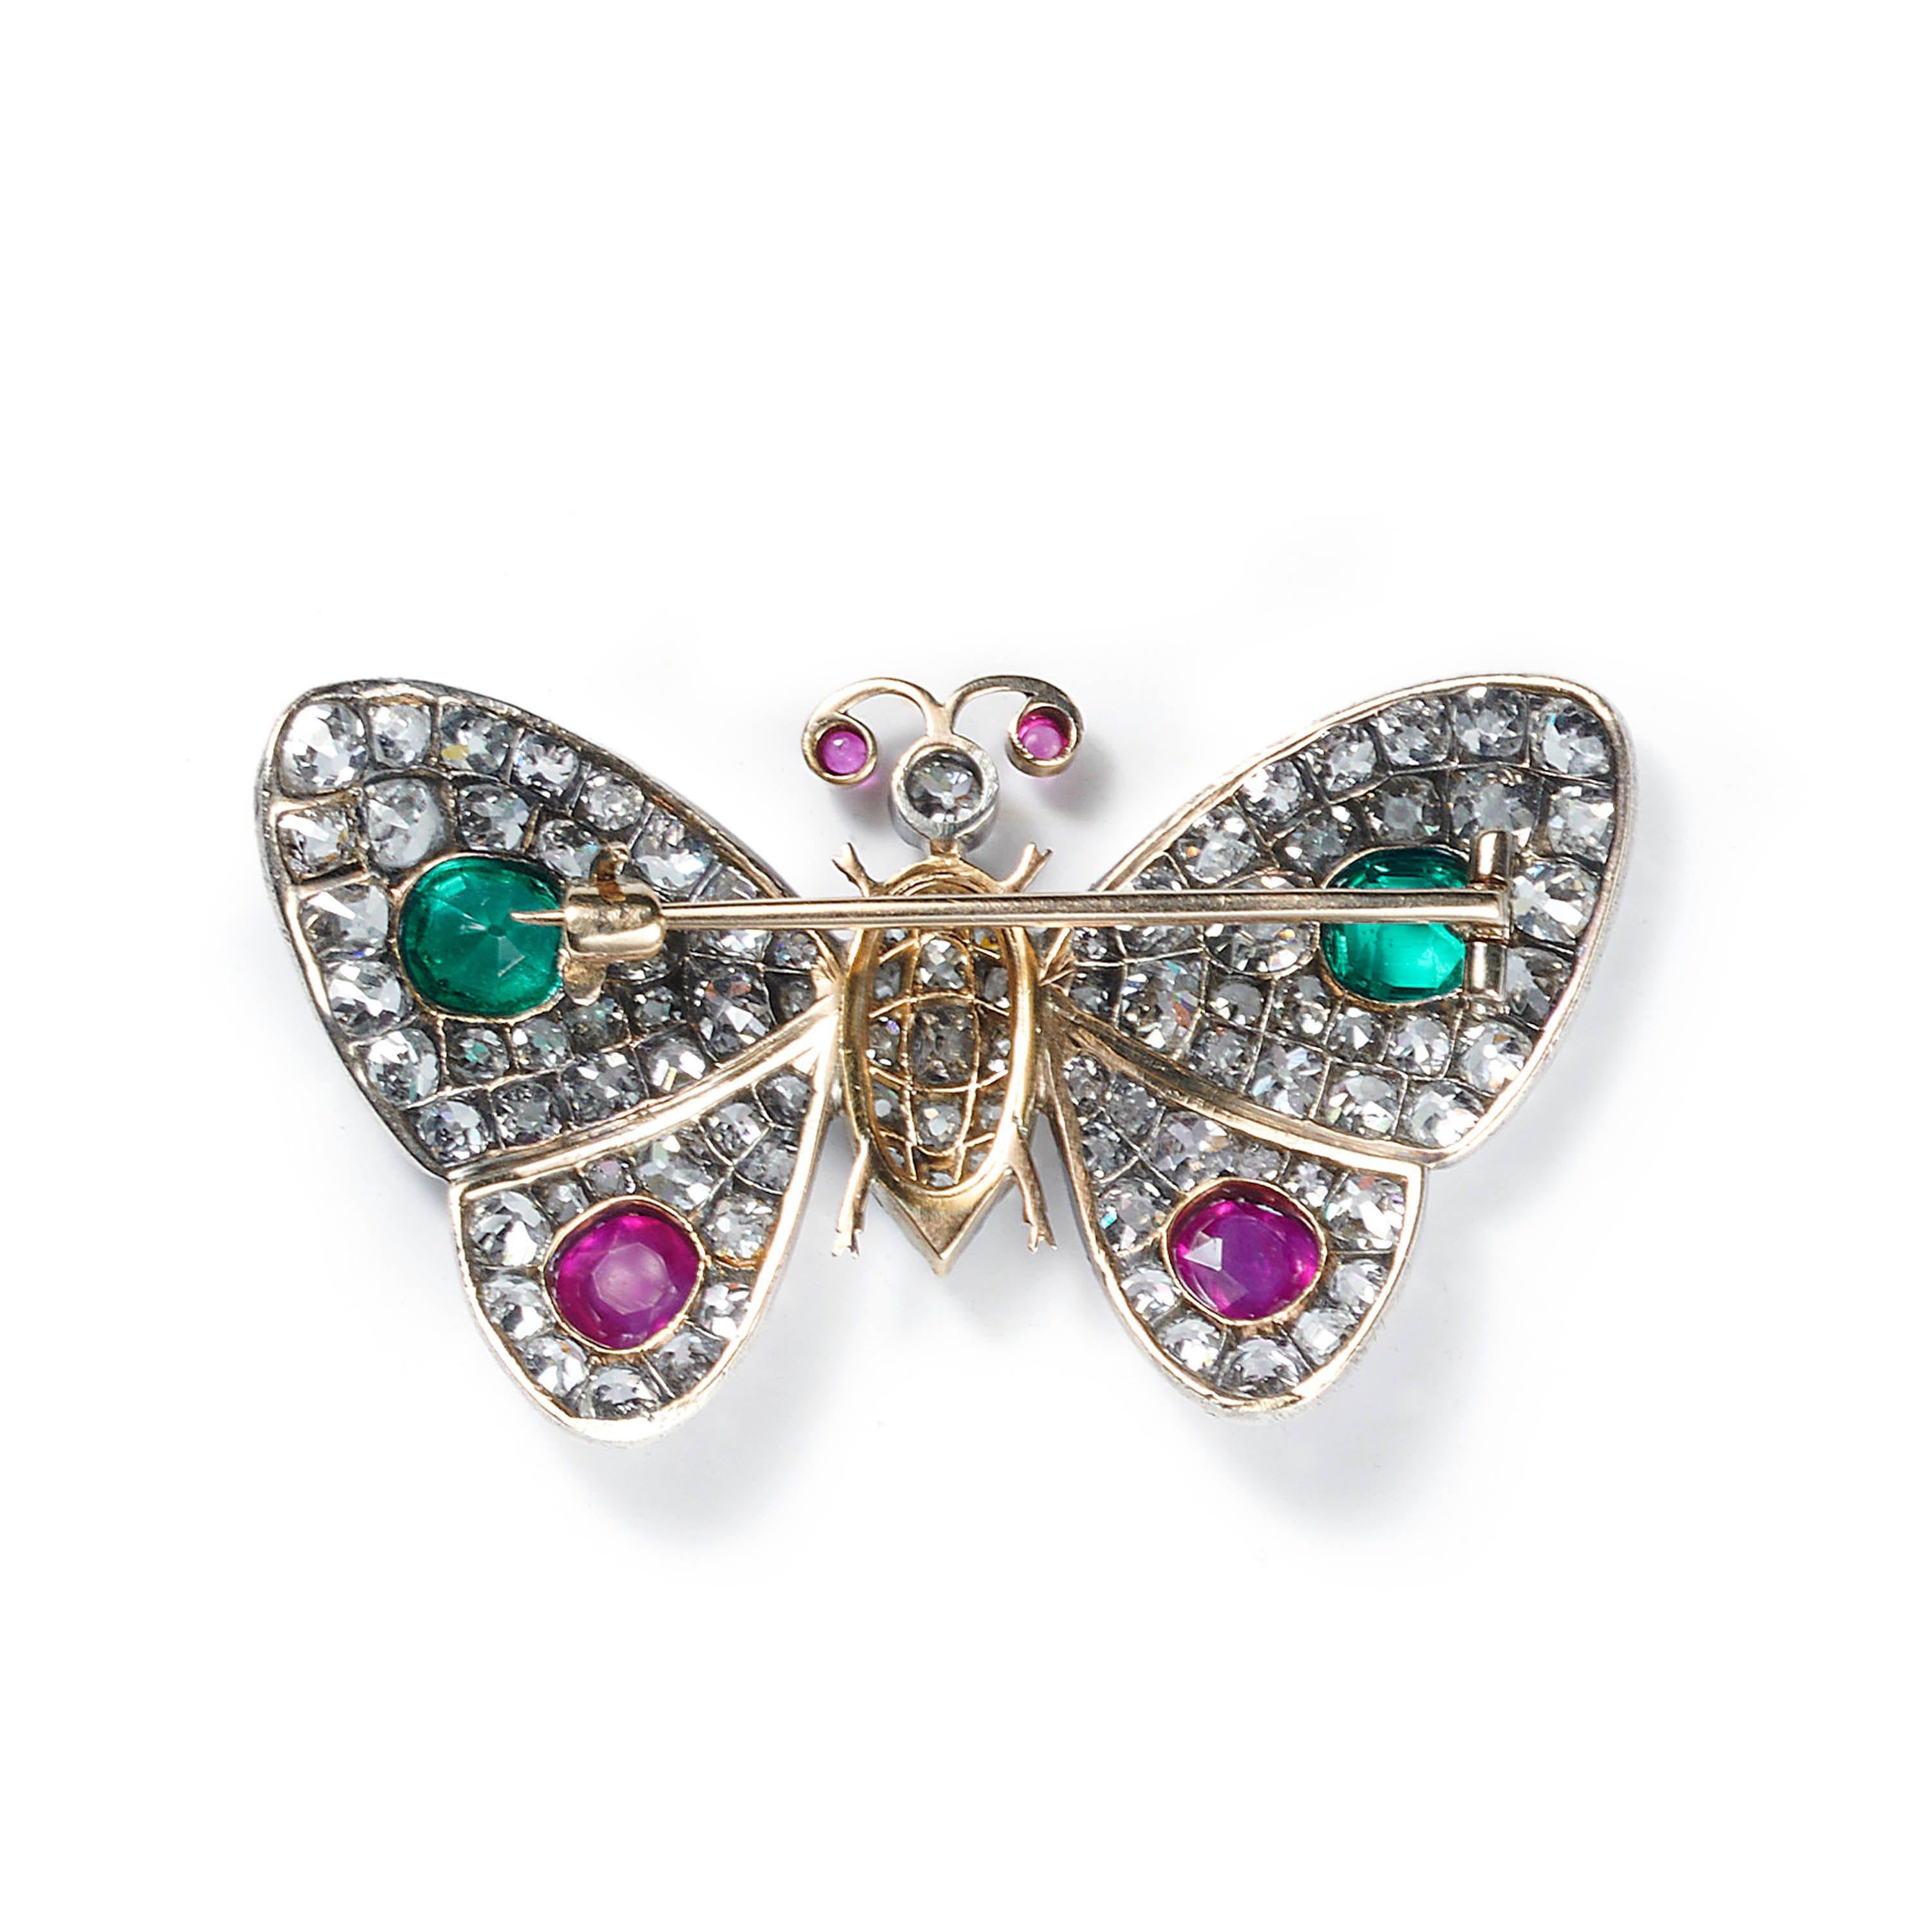 Old Mine Cut Antique Diamond, Emerald, Ruby, Silver And Gold Butterfly Brooch, Circa 1880 For Sale